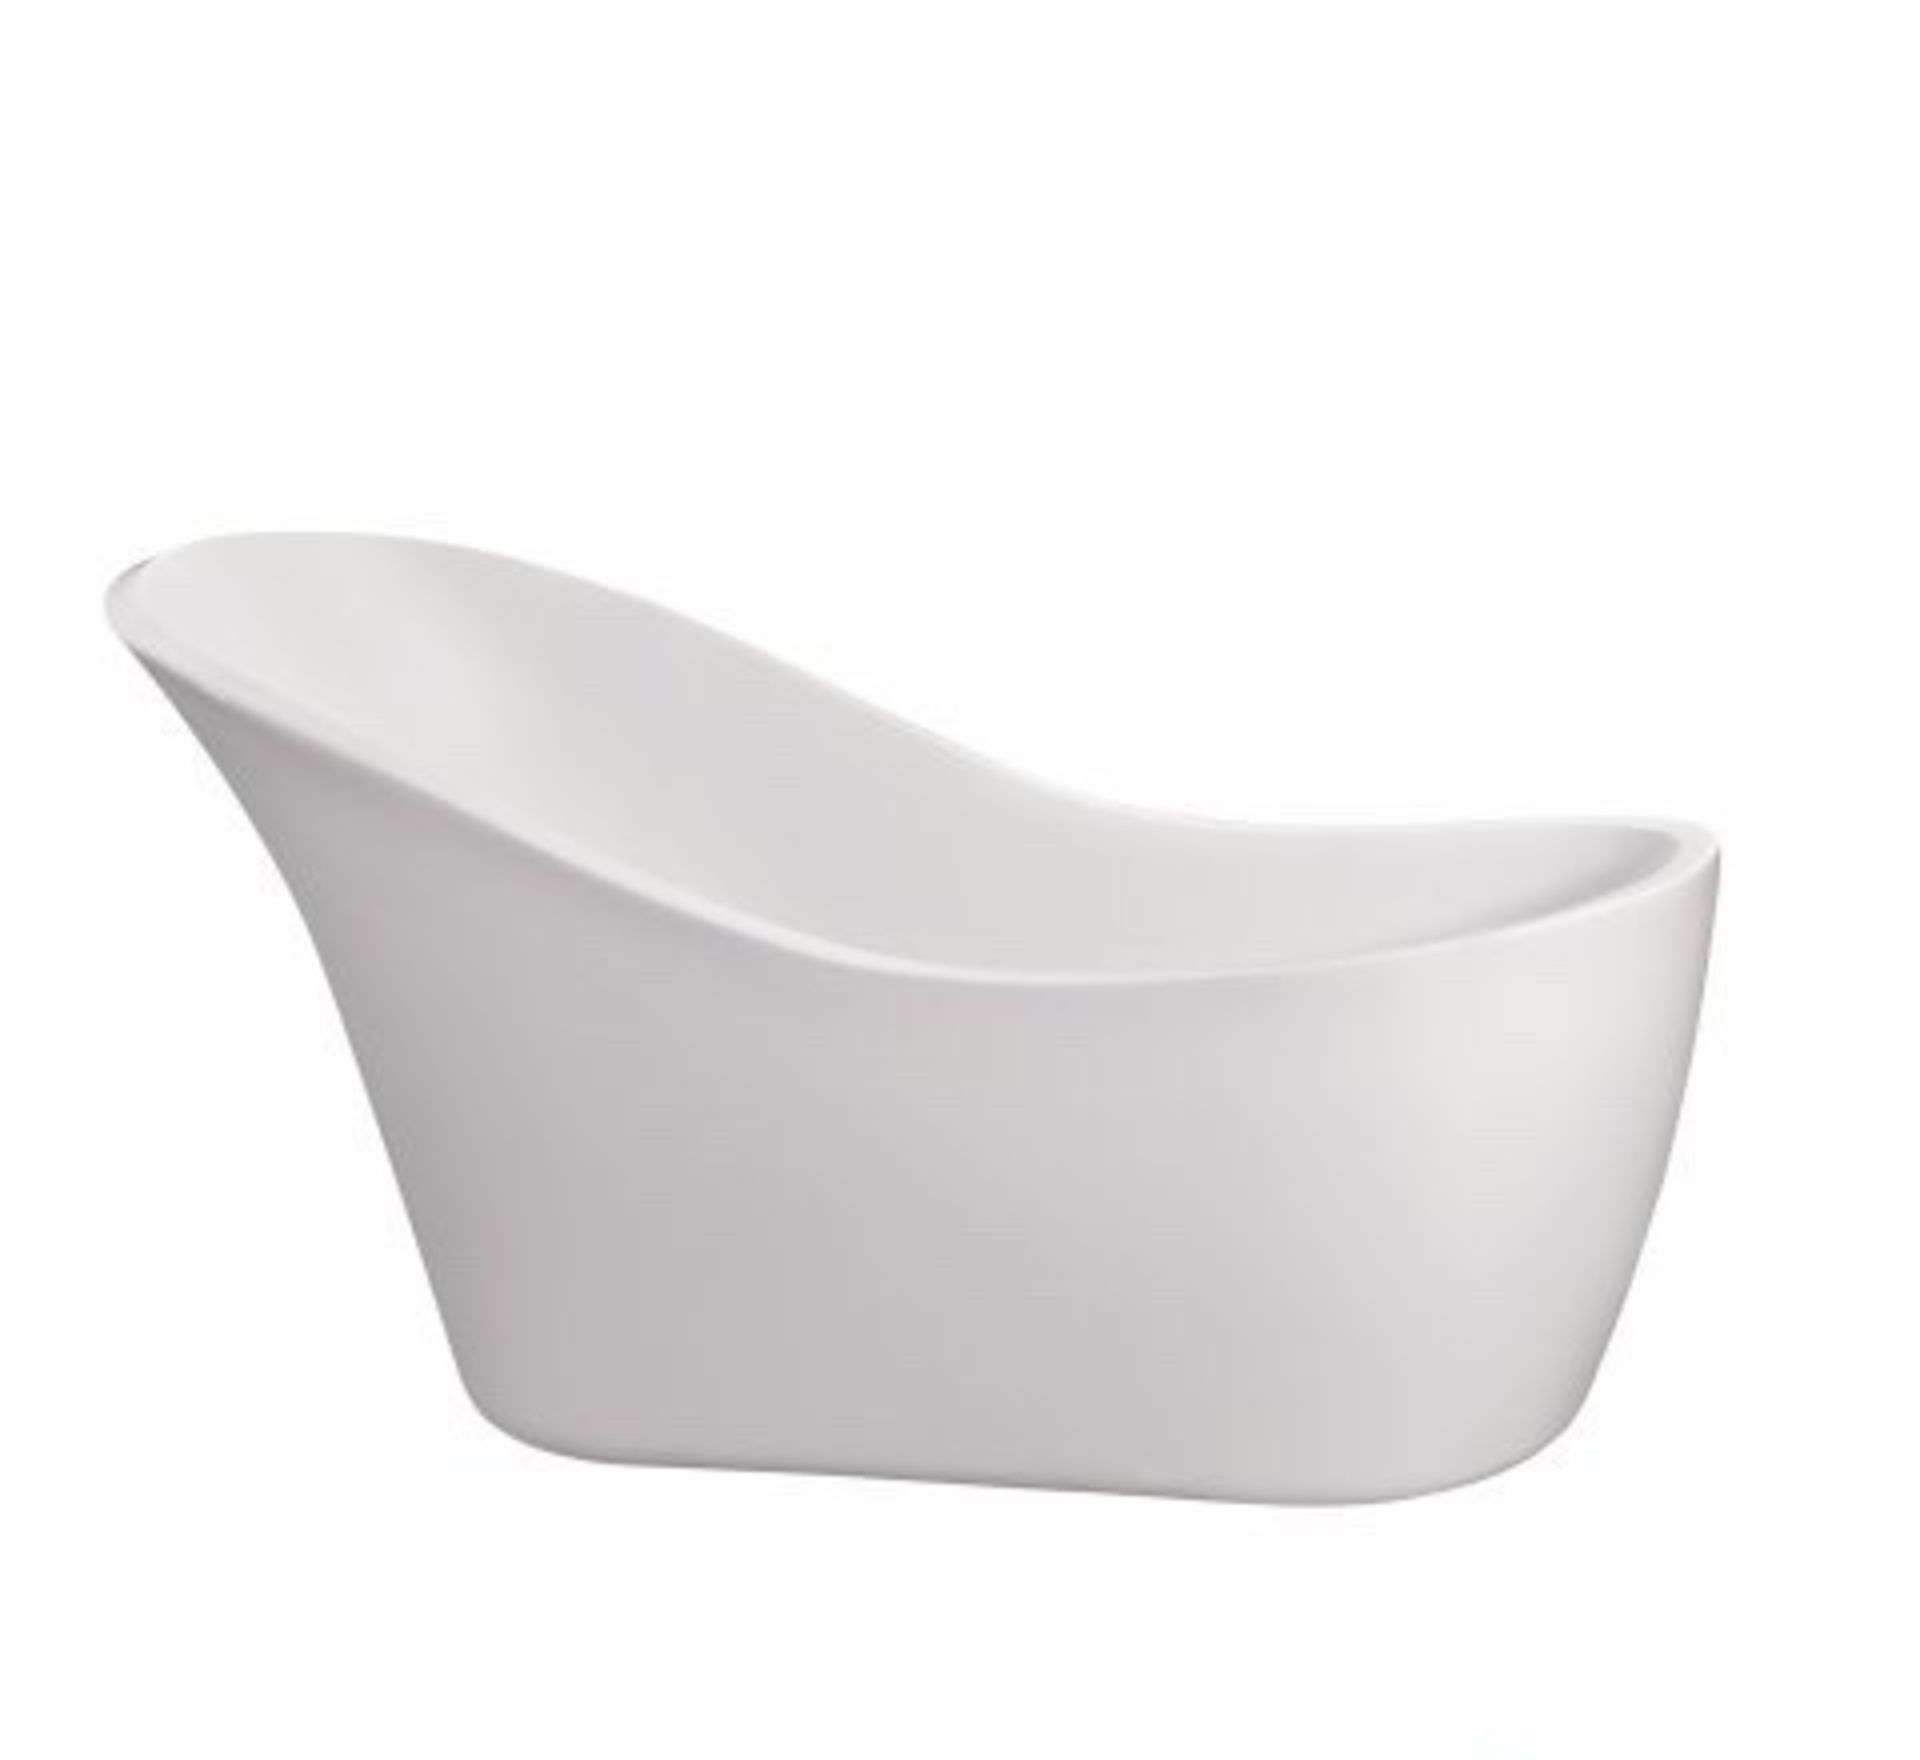 A30 - 1730x725mm Nyos Freestanding Bathtub - Large. RRP £1,000. This gloss white freestanding - Image 2 of 3